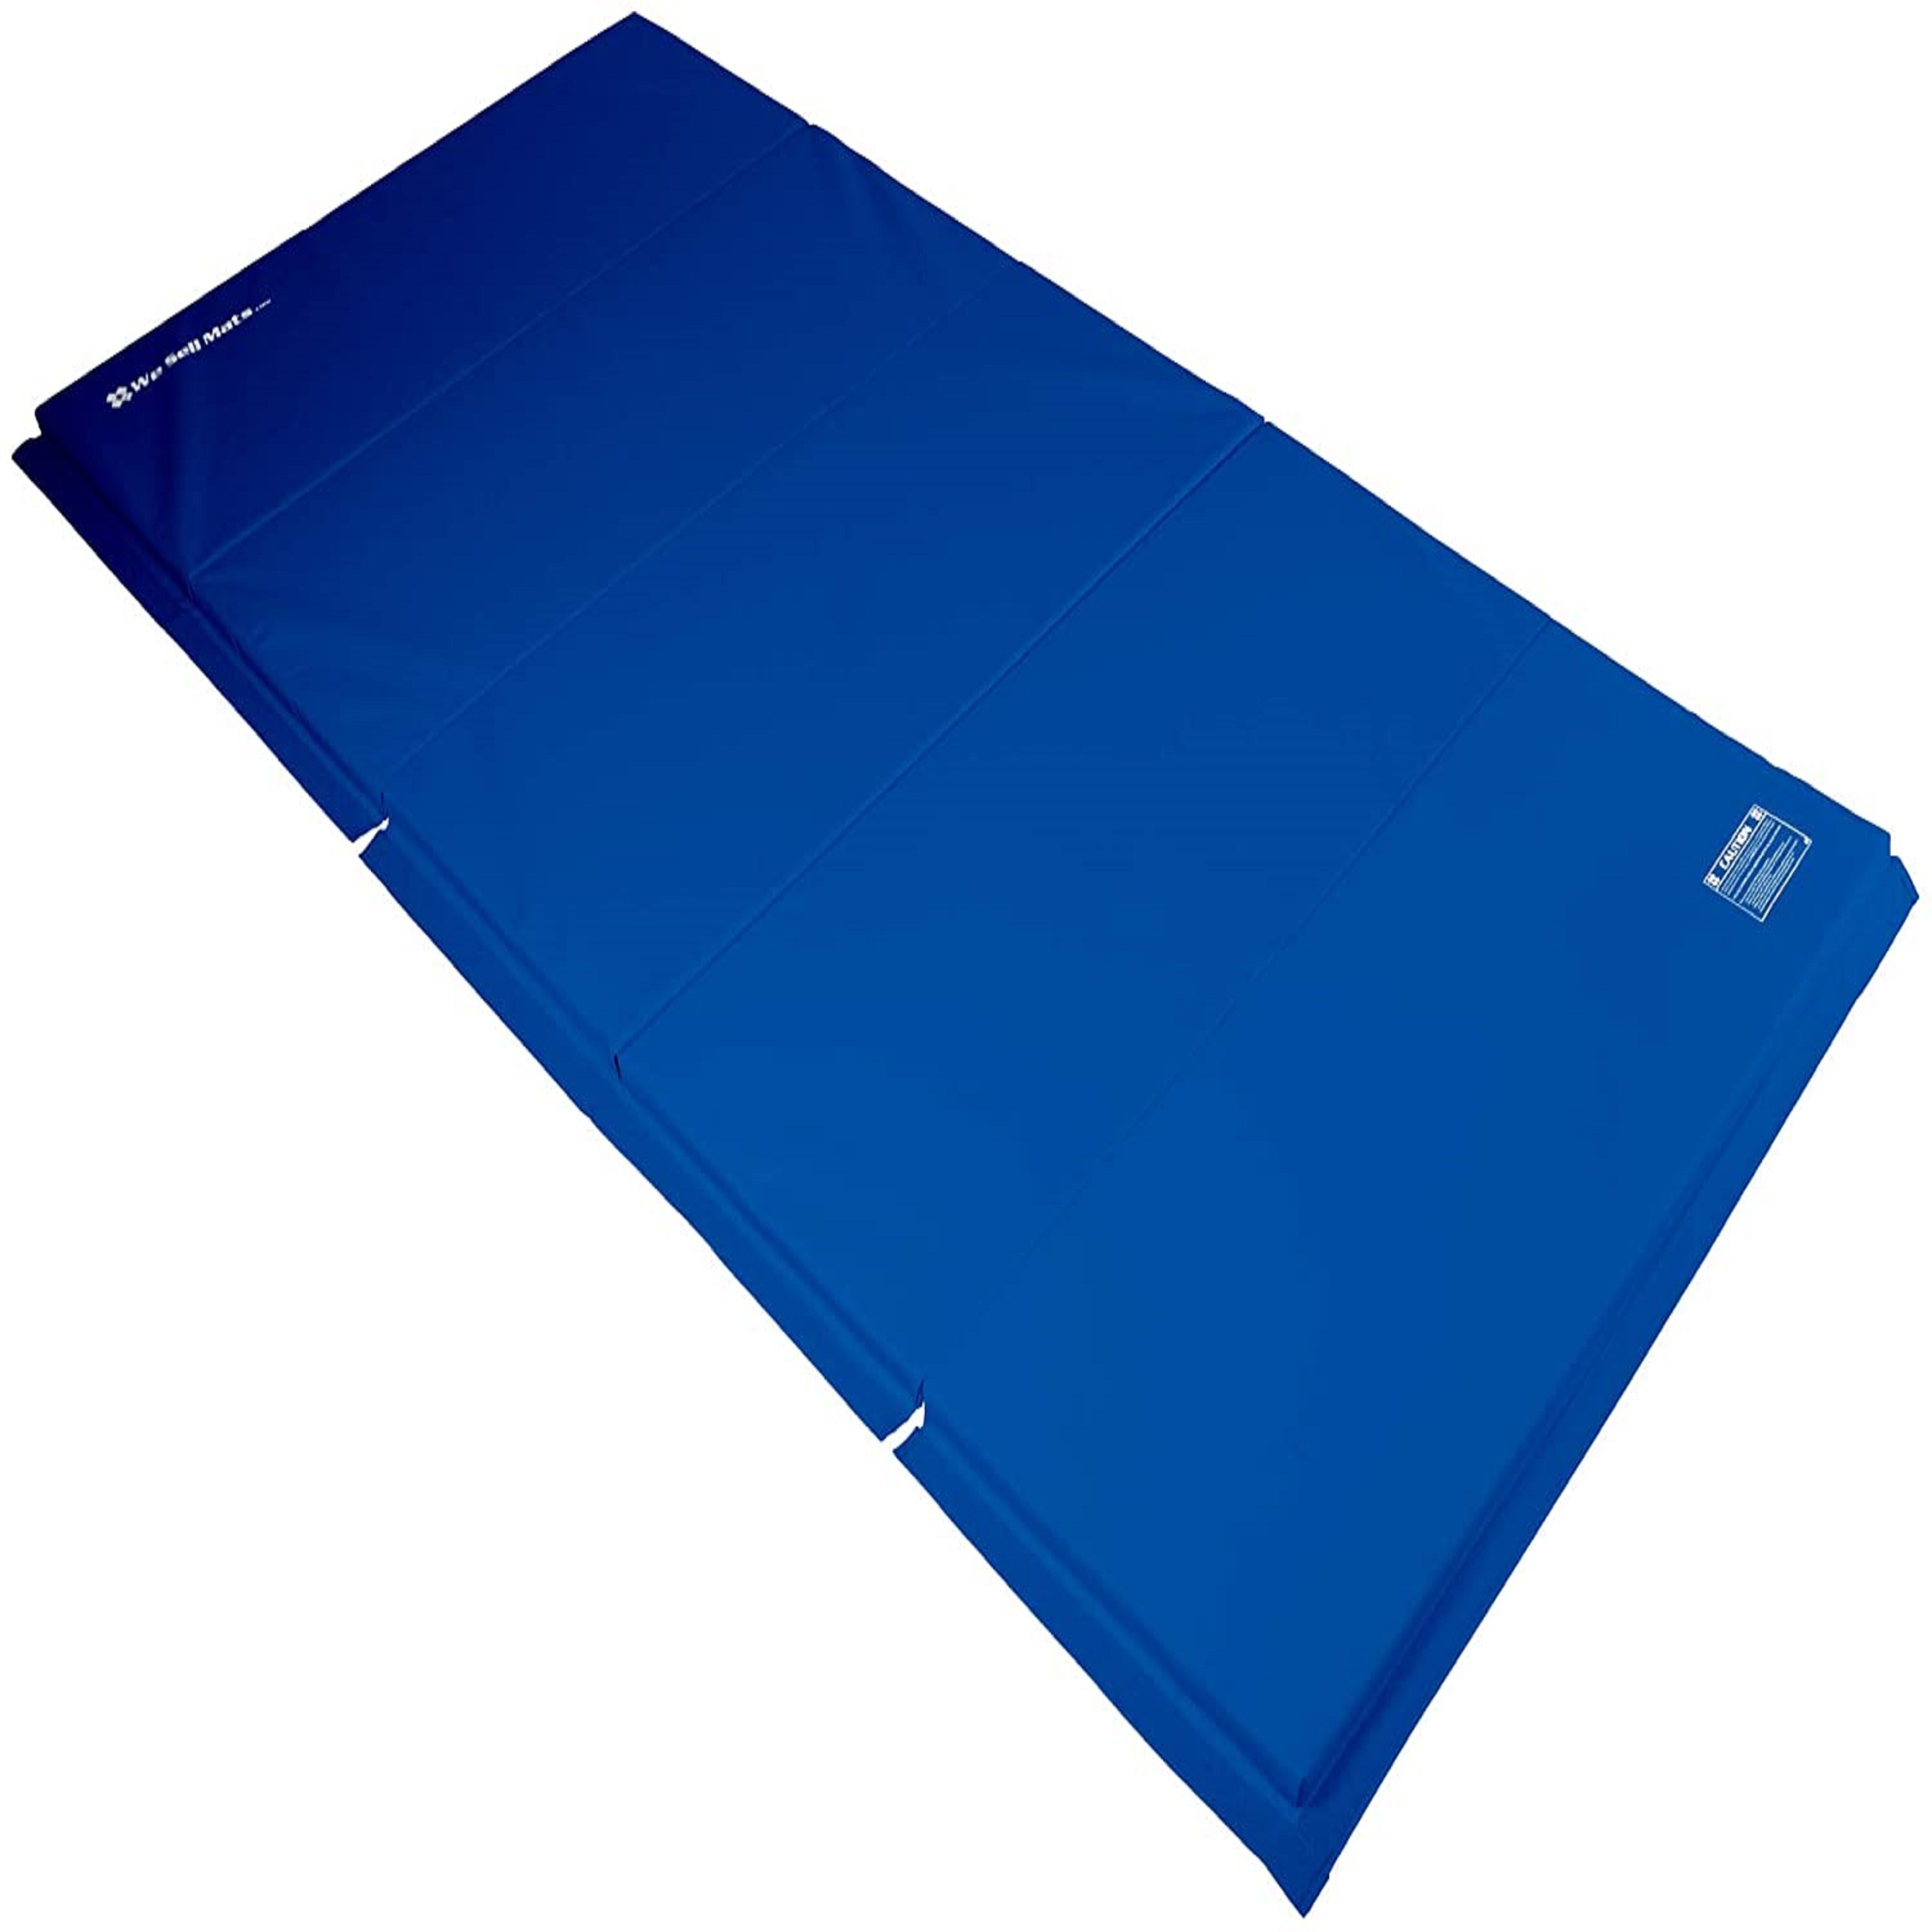 https://ak1.ostkcdn.com/images/products/is/images/direct/946bfe81664a7e7bb904ebf716271f79f22bdd81/We-Sell-Mats-5-ft-x-10-ft-Gymnastics-Mat%2C-Folding-Tumbling-Mat-for-Exercise.jpg